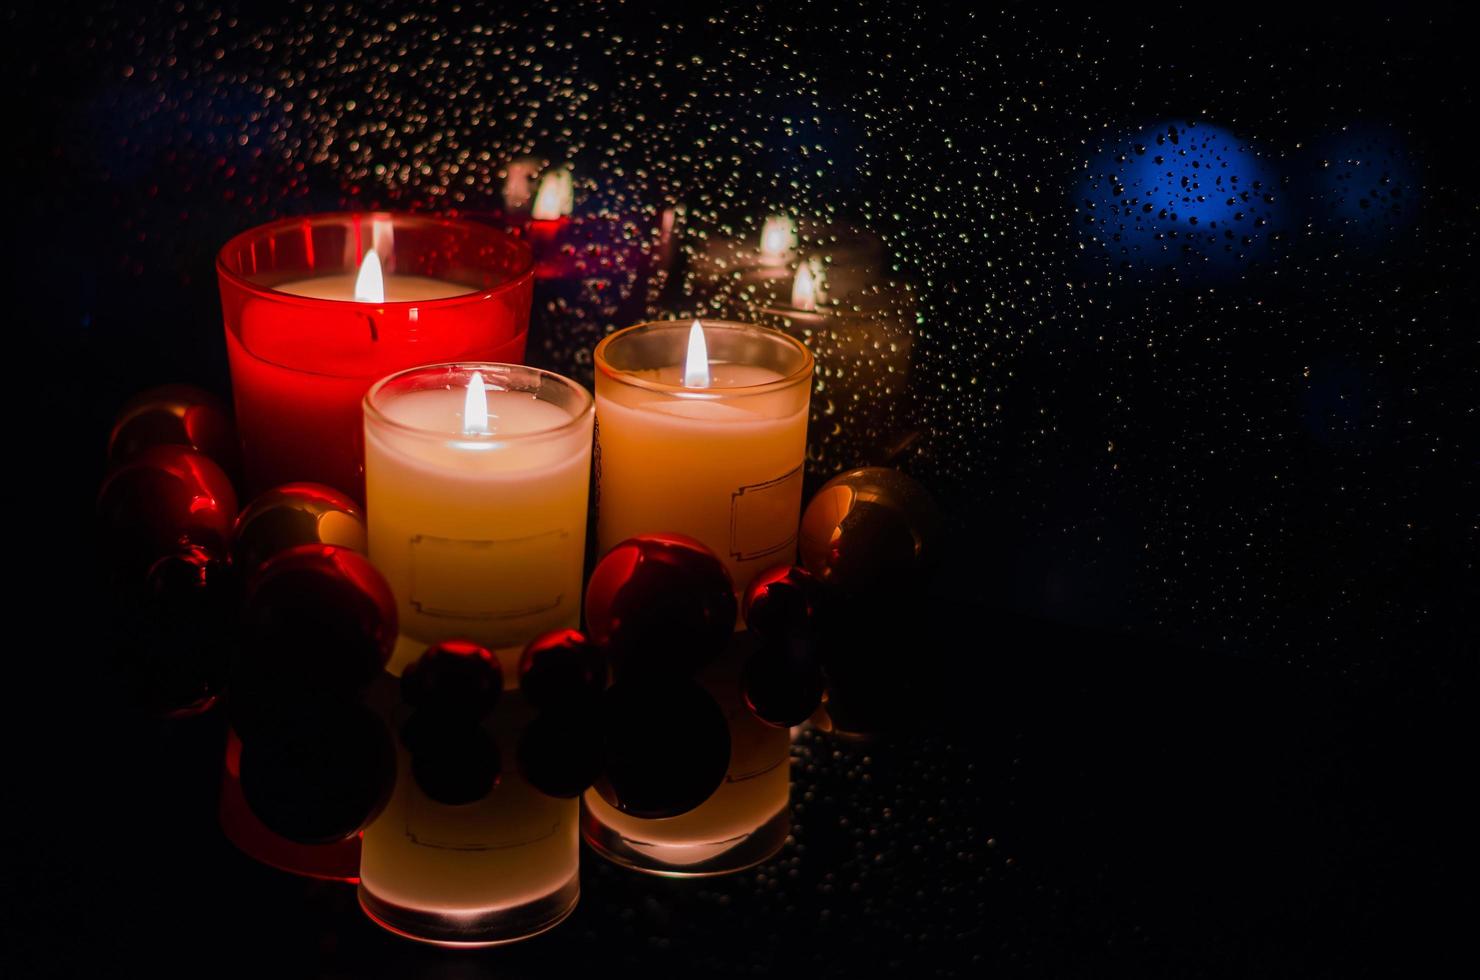 Focus and blurred of burning candles with Chirstmas ornaments put beside window that have rain drop in dark background. photo